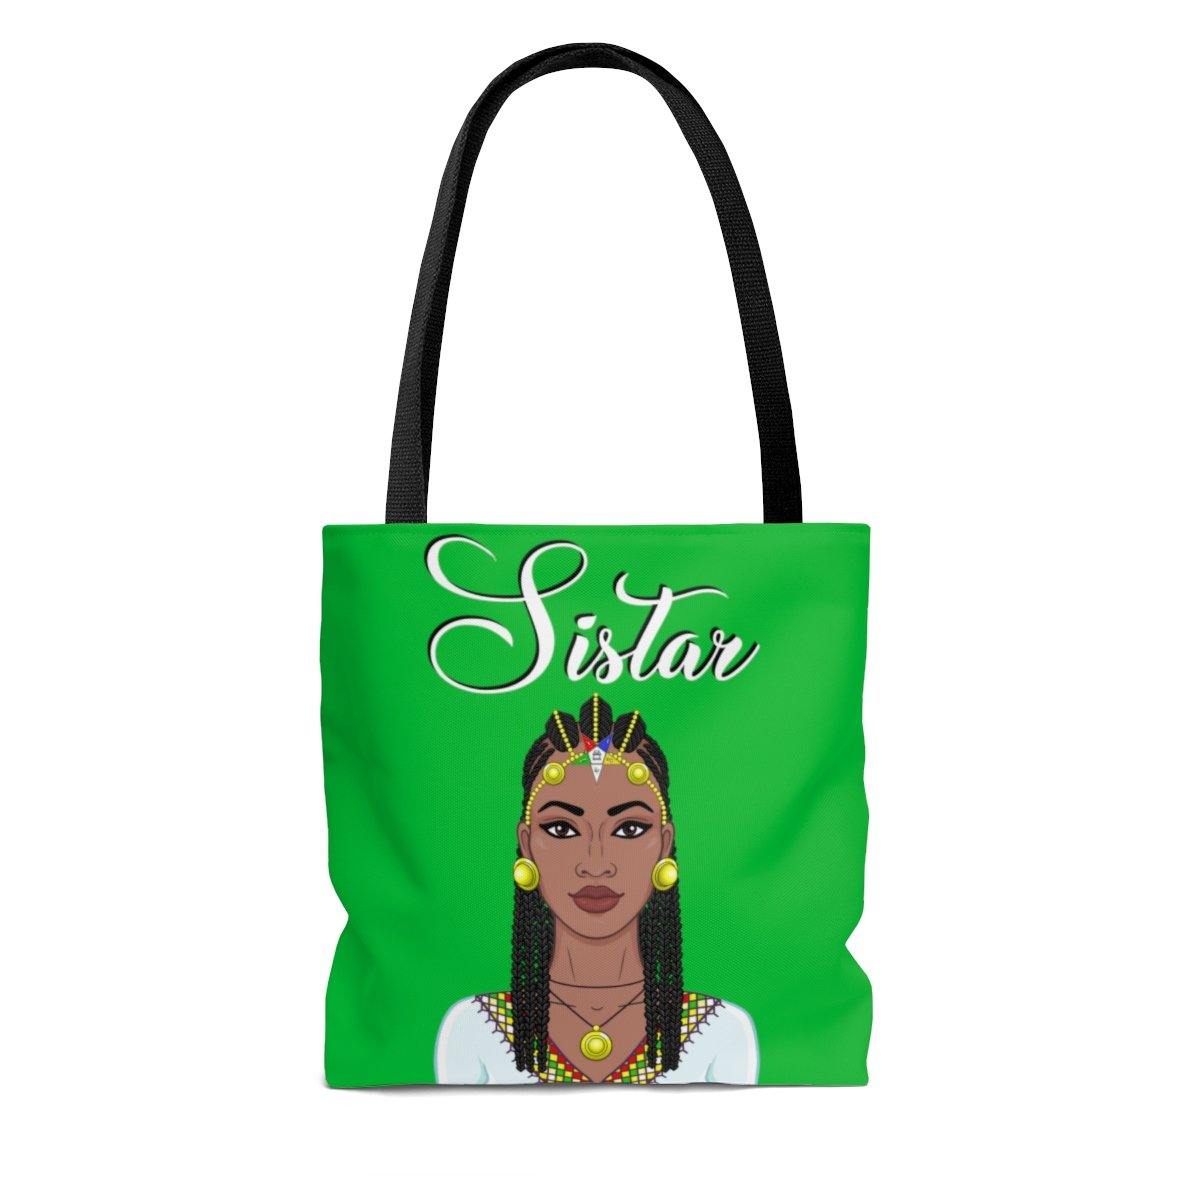 Order of Eastern Star // Eastern Star clothing // OES Sistar Tote Bag - Green - Strong Girl Tees